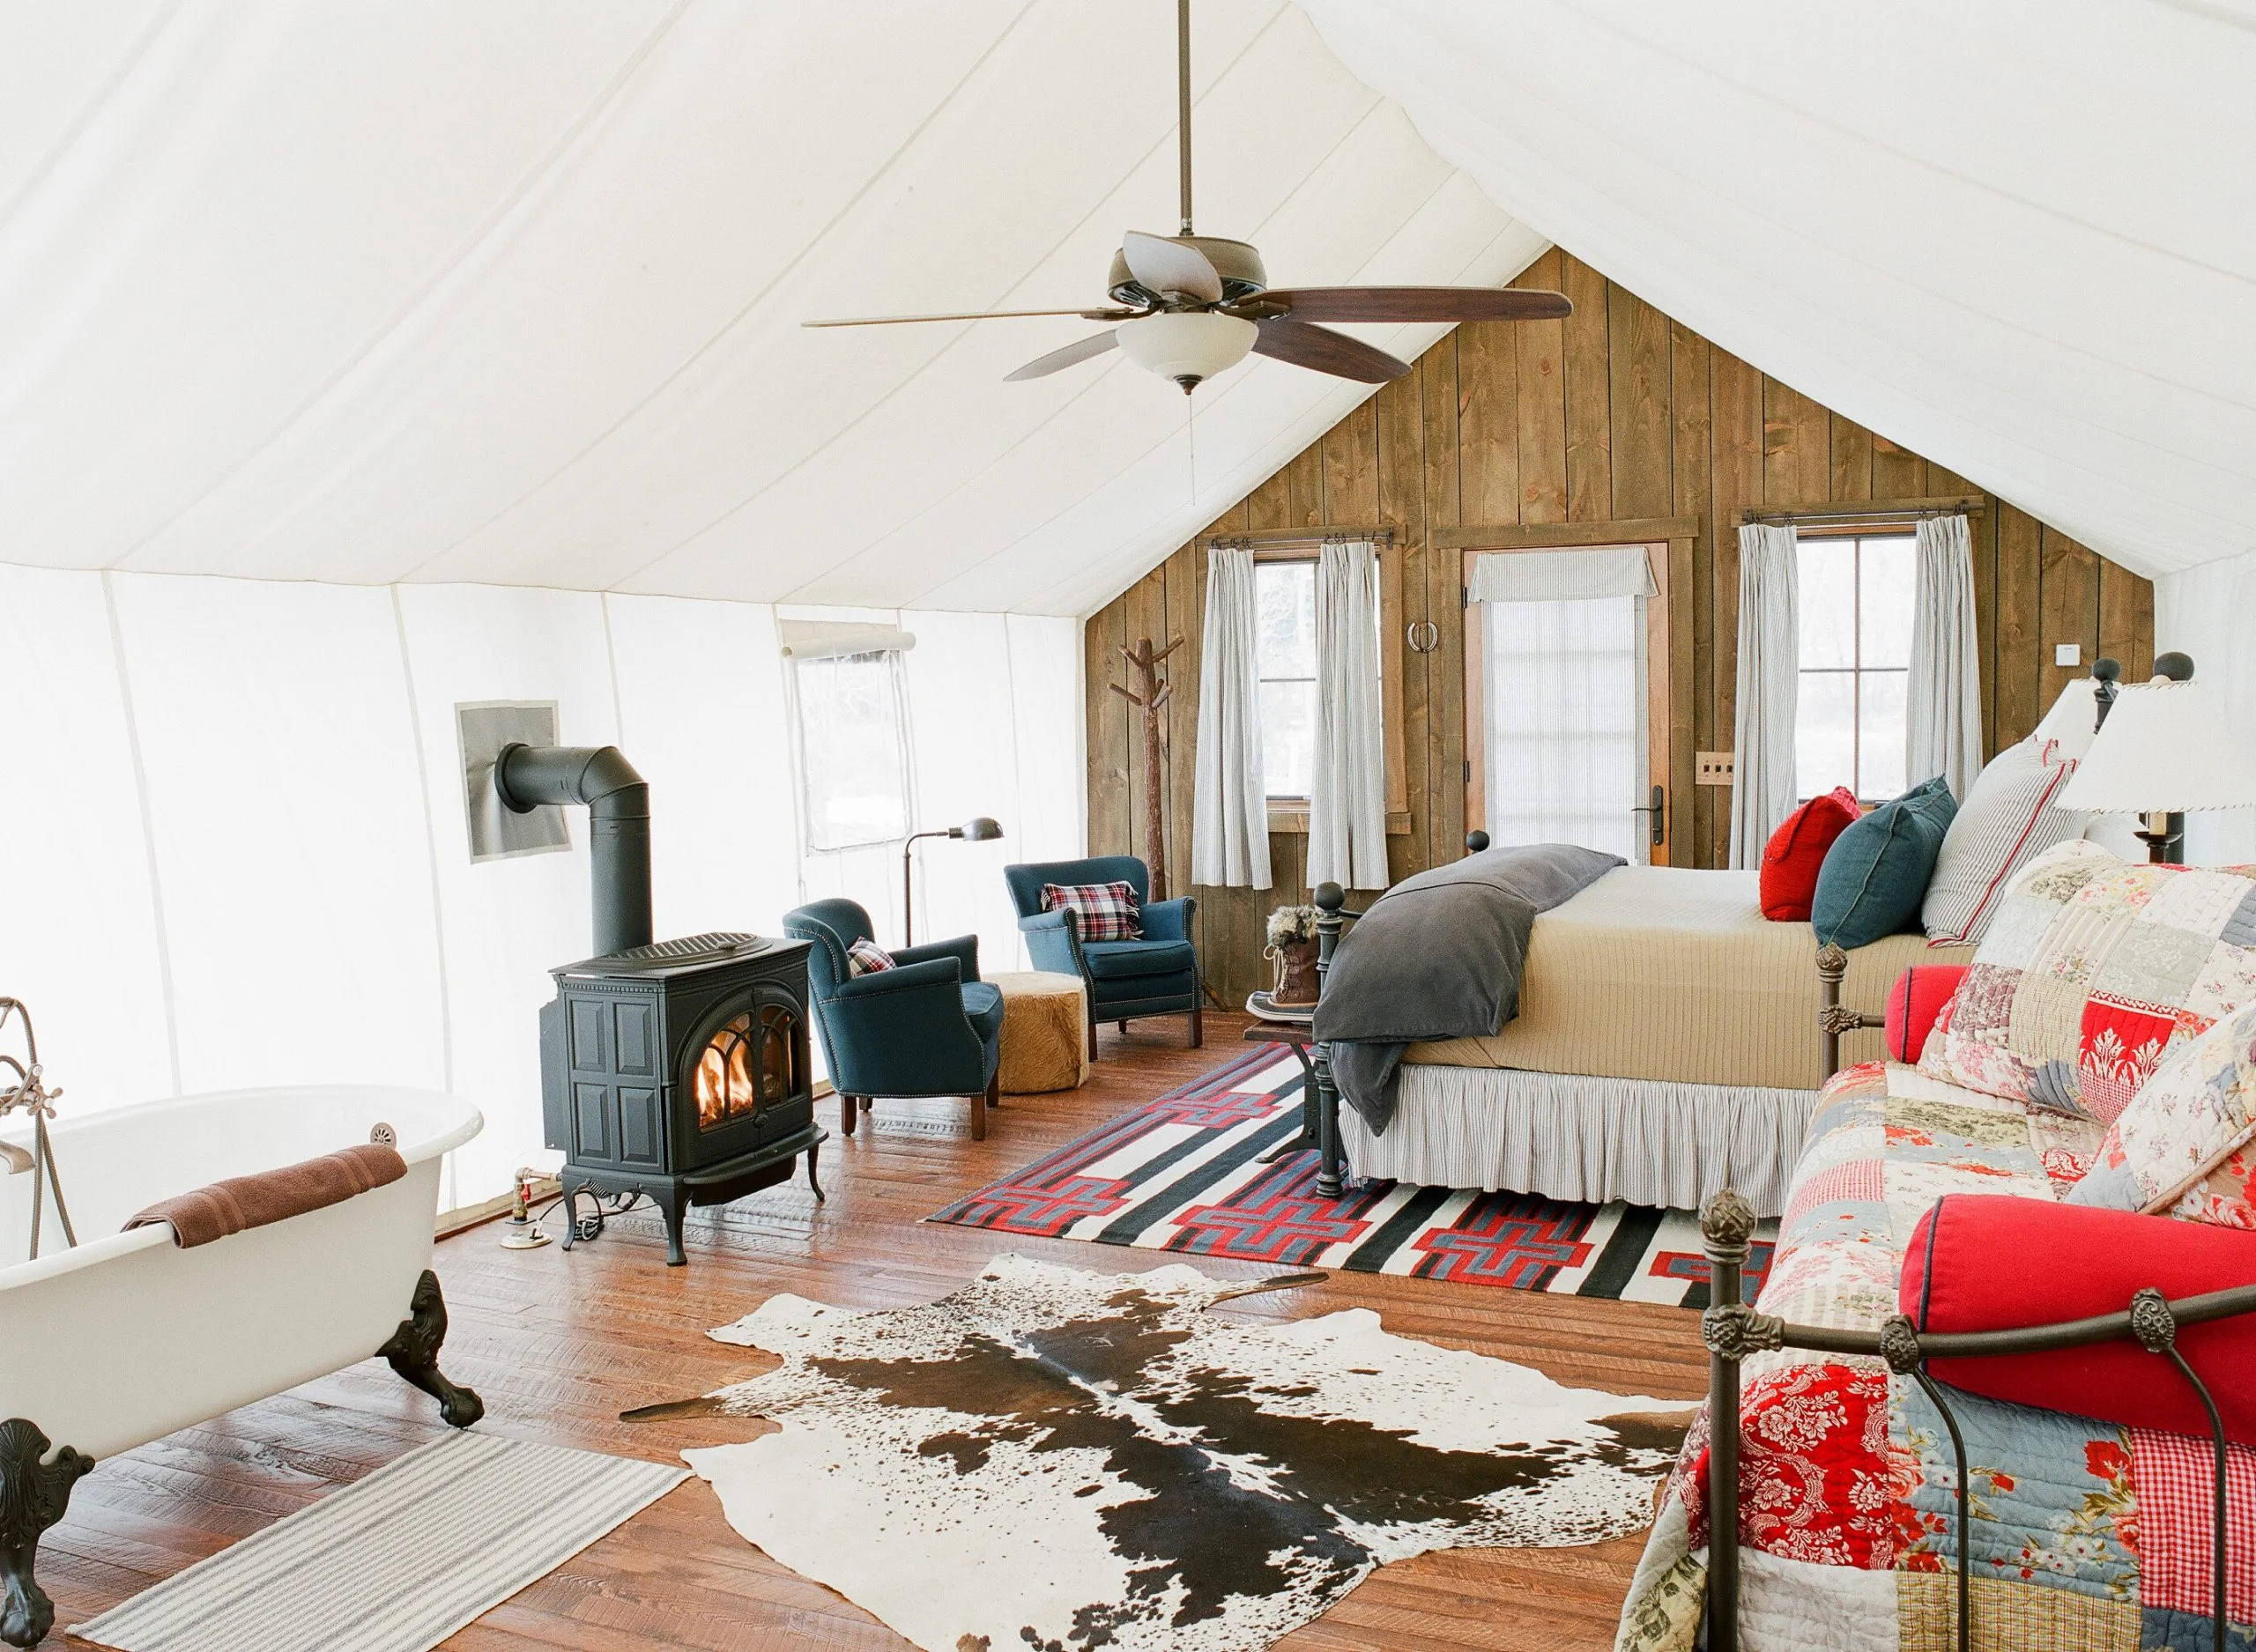 A bedroom inside a tent cabin with a hanging ceiling fan, wood burning fireplace, bathtub, animal skin rug, and a bench with a quilt with matching pillows